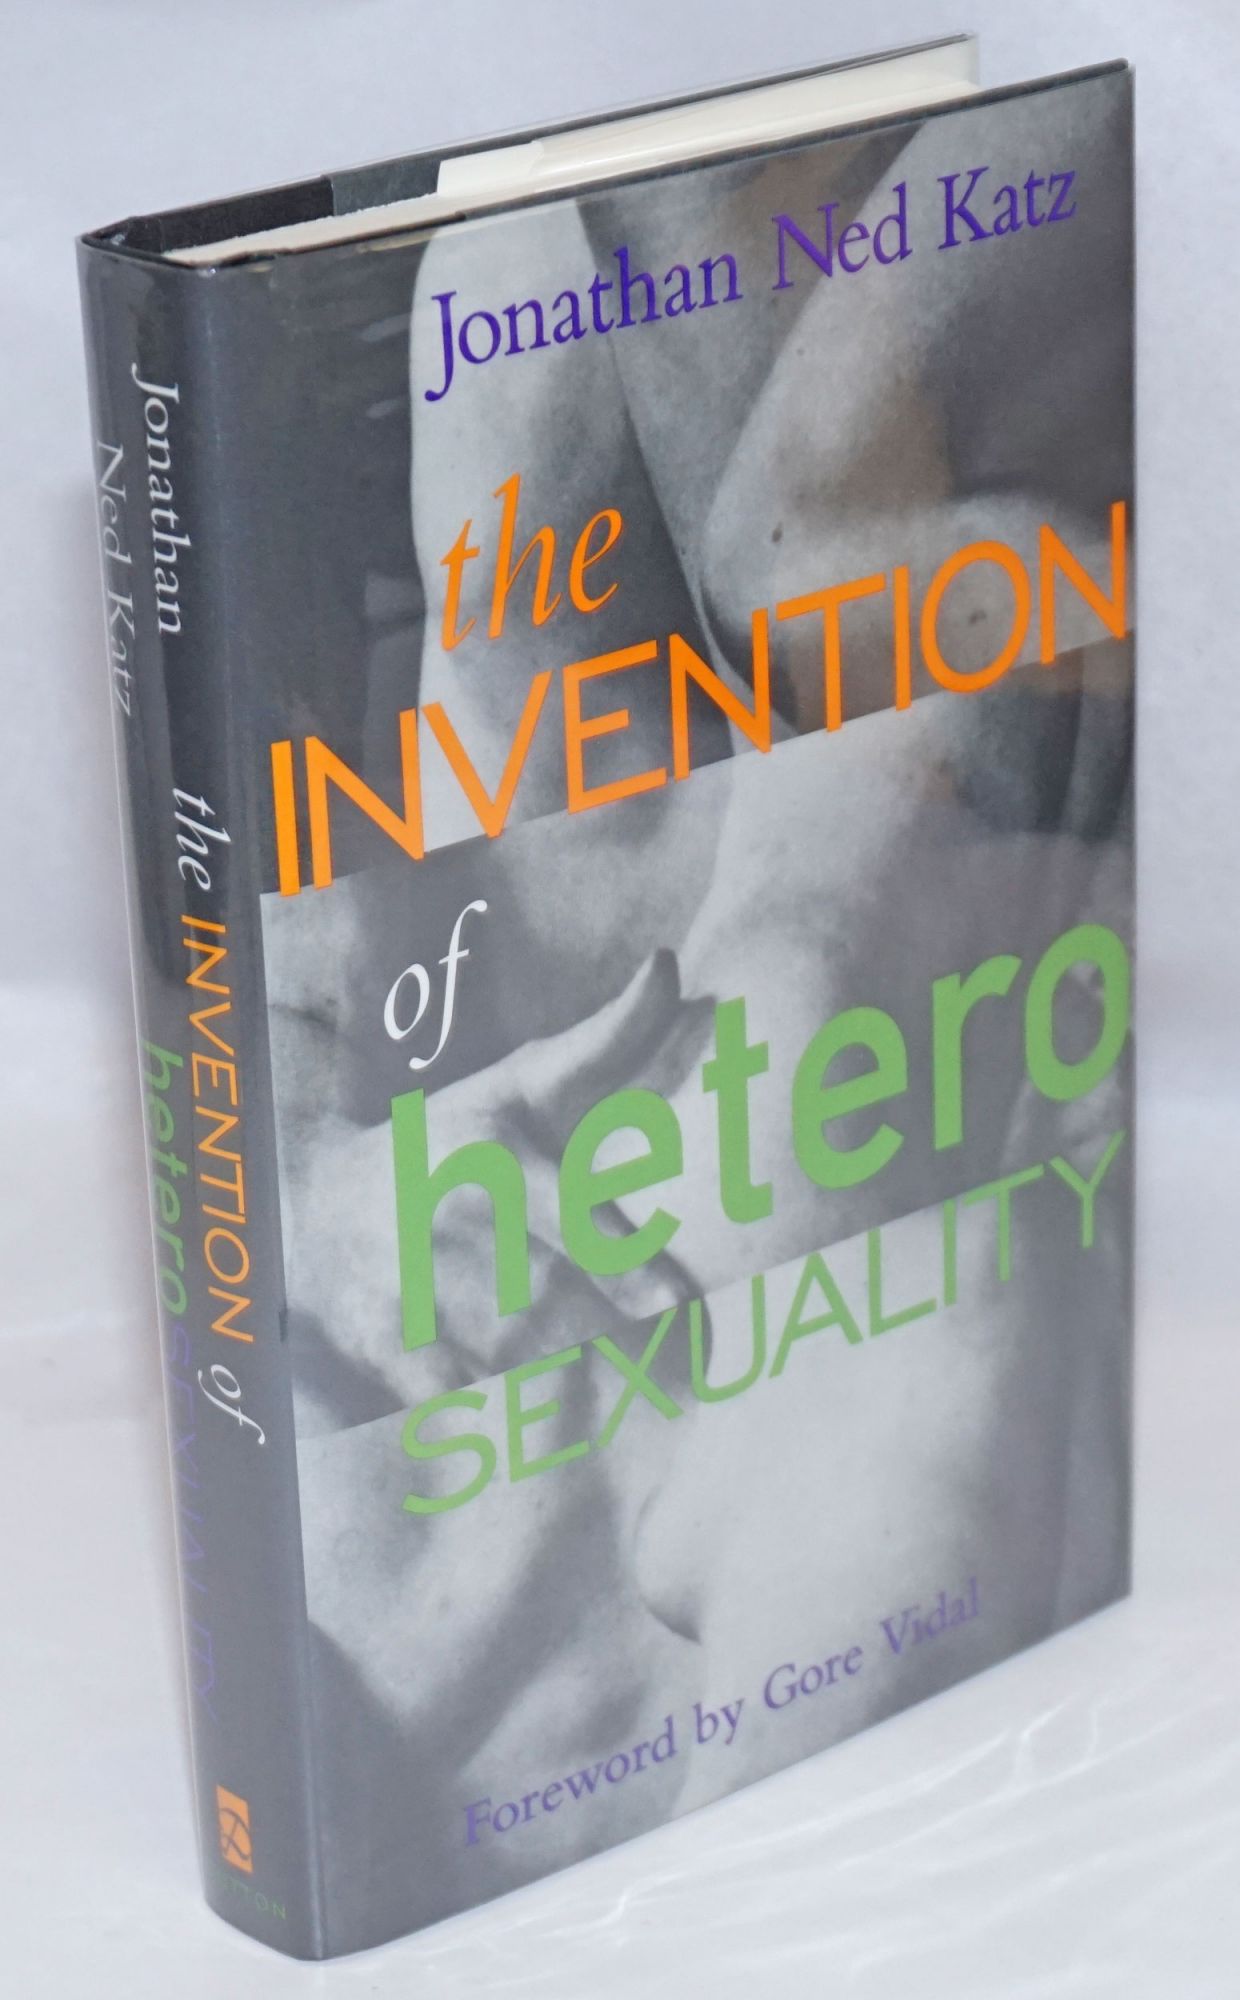 The Invention of Heterosexuality - Katz, Jonathan Ned, foreword by Gore Vidal, afterword by Lisa Duggan